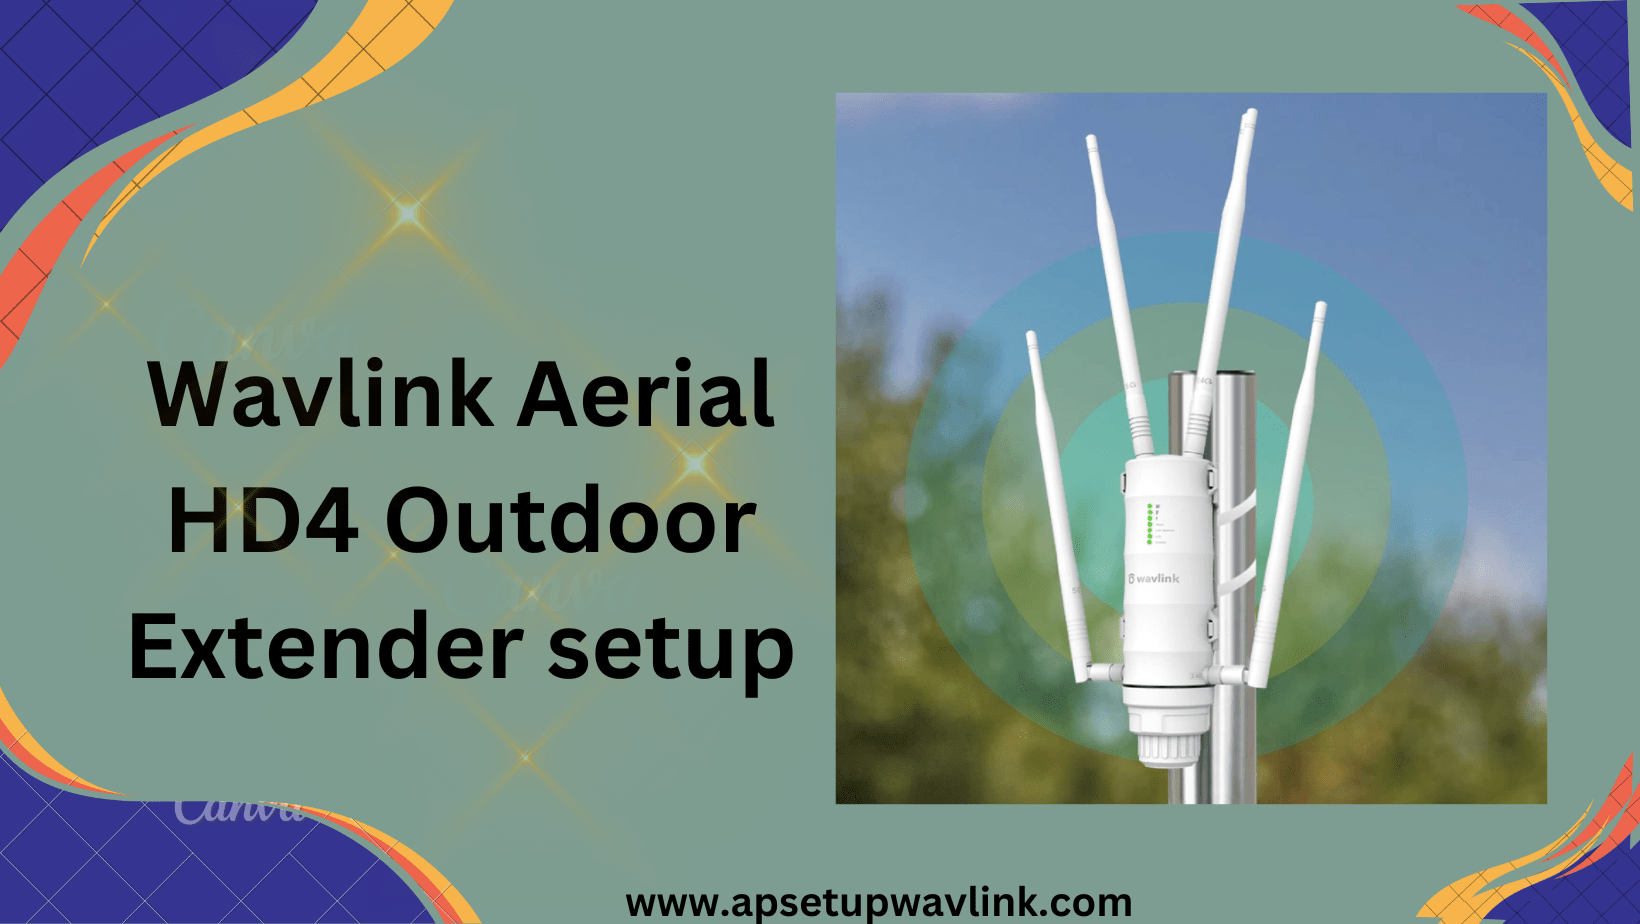 You are currently viewing Wavlink Aerial HD4 Outdoor Extender setup